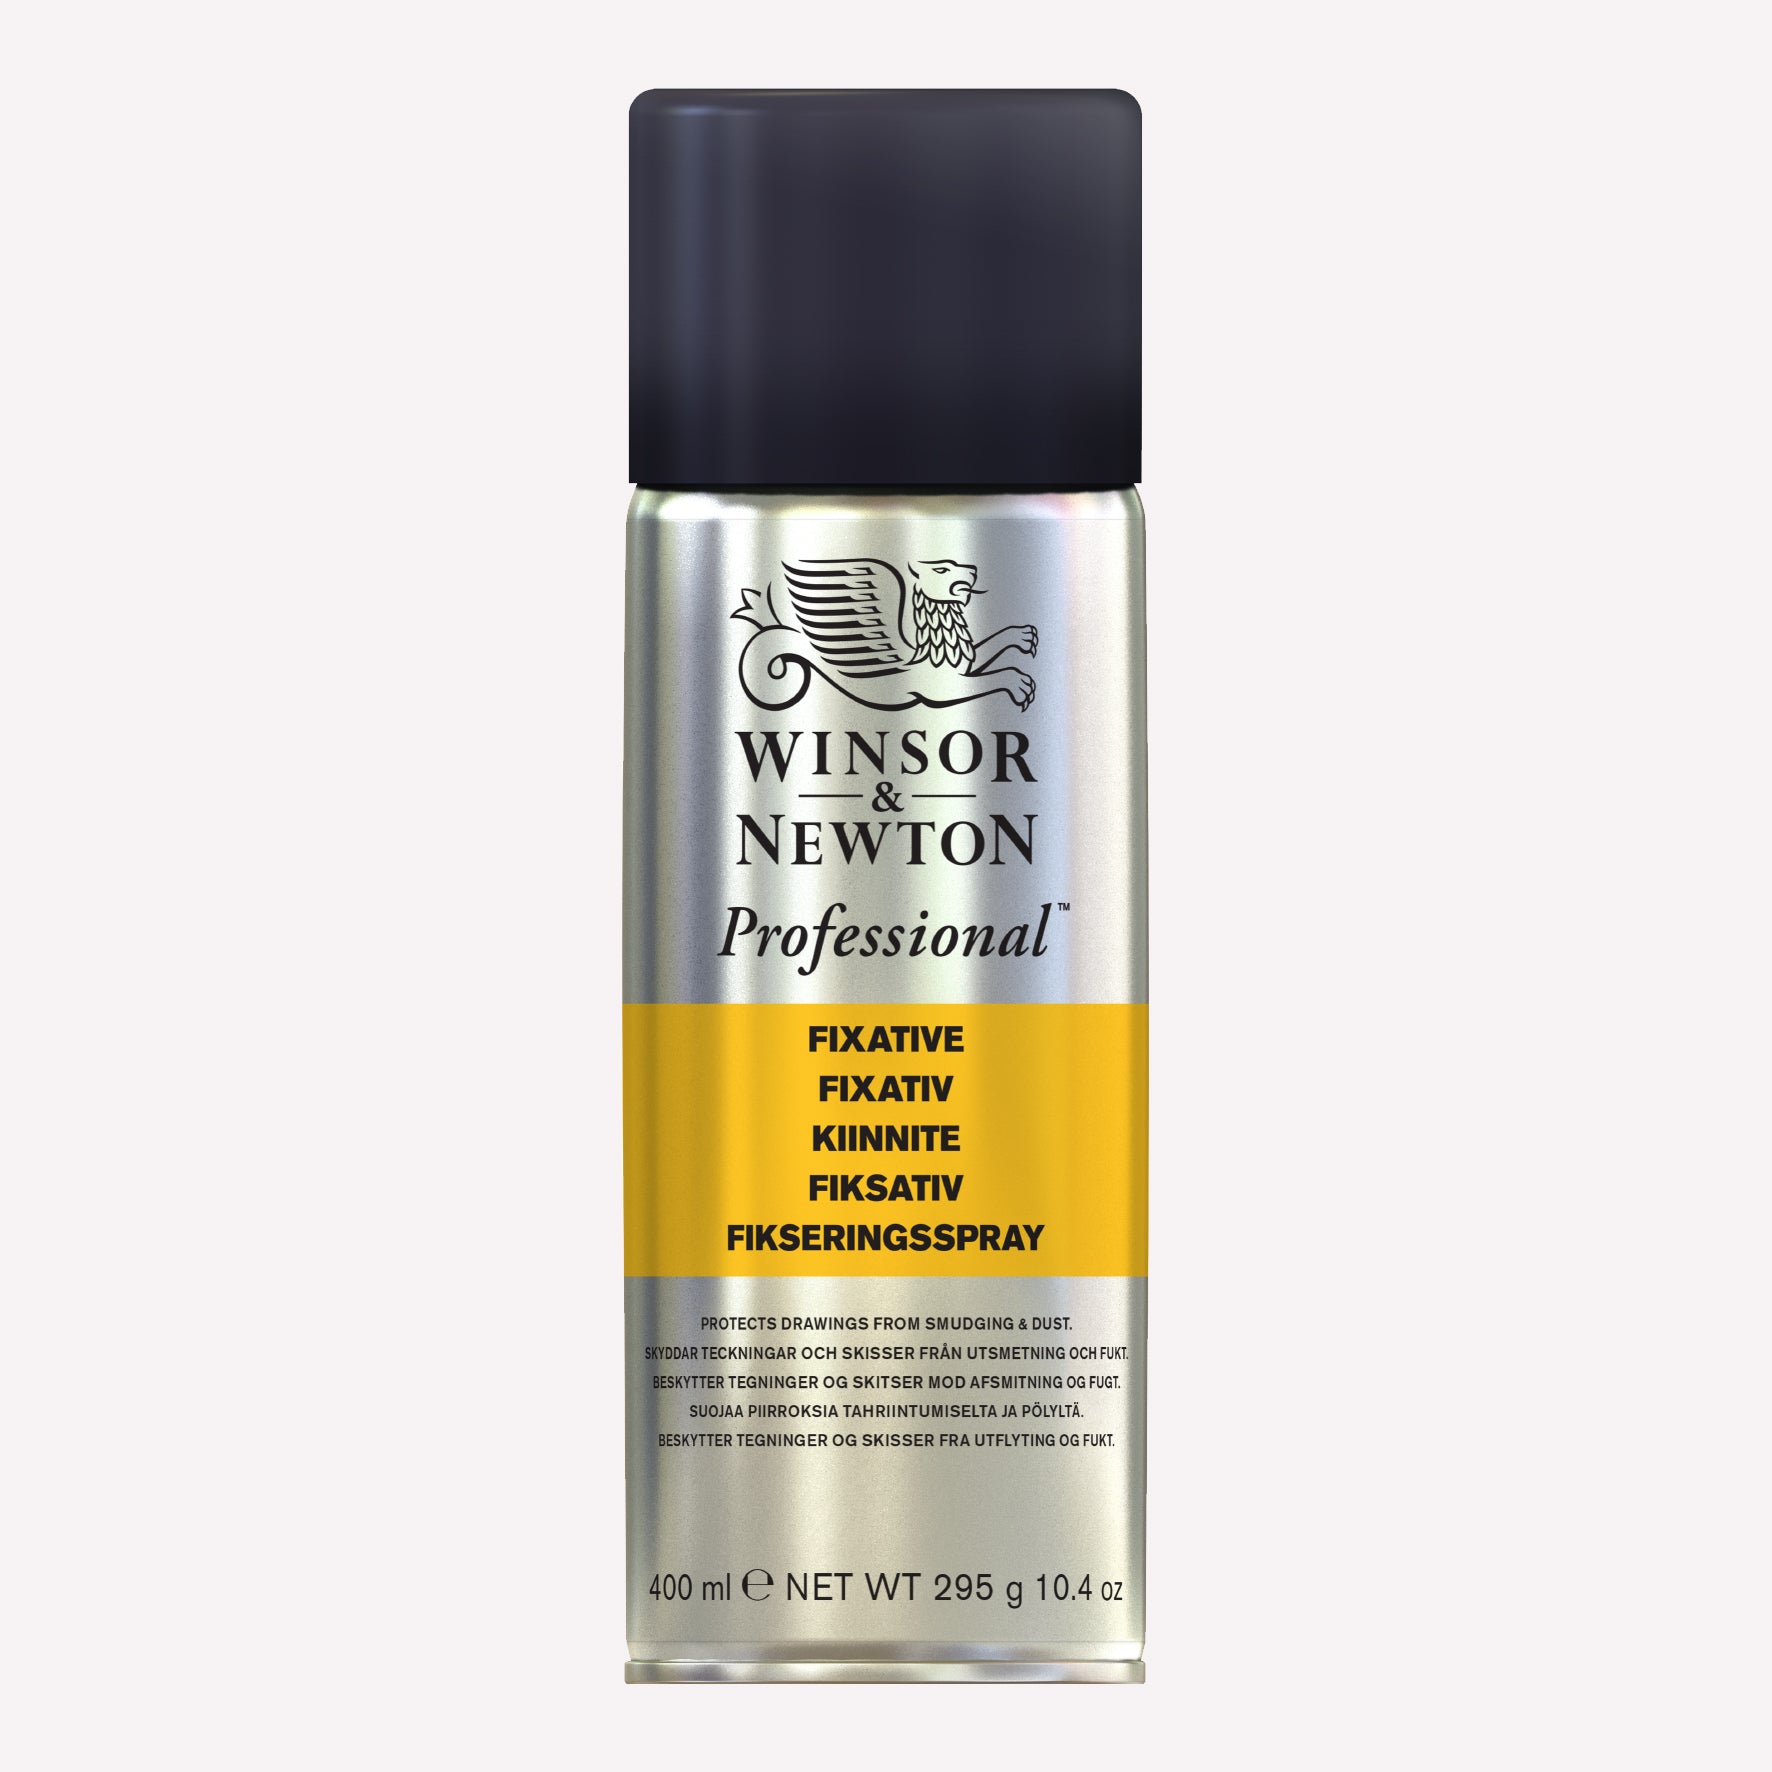 Winsor & Newton's Professional Fixative Spray packaged in a silver aerosol can with a black lid and yellow detailing. Designed to protect artwork from smudging. 